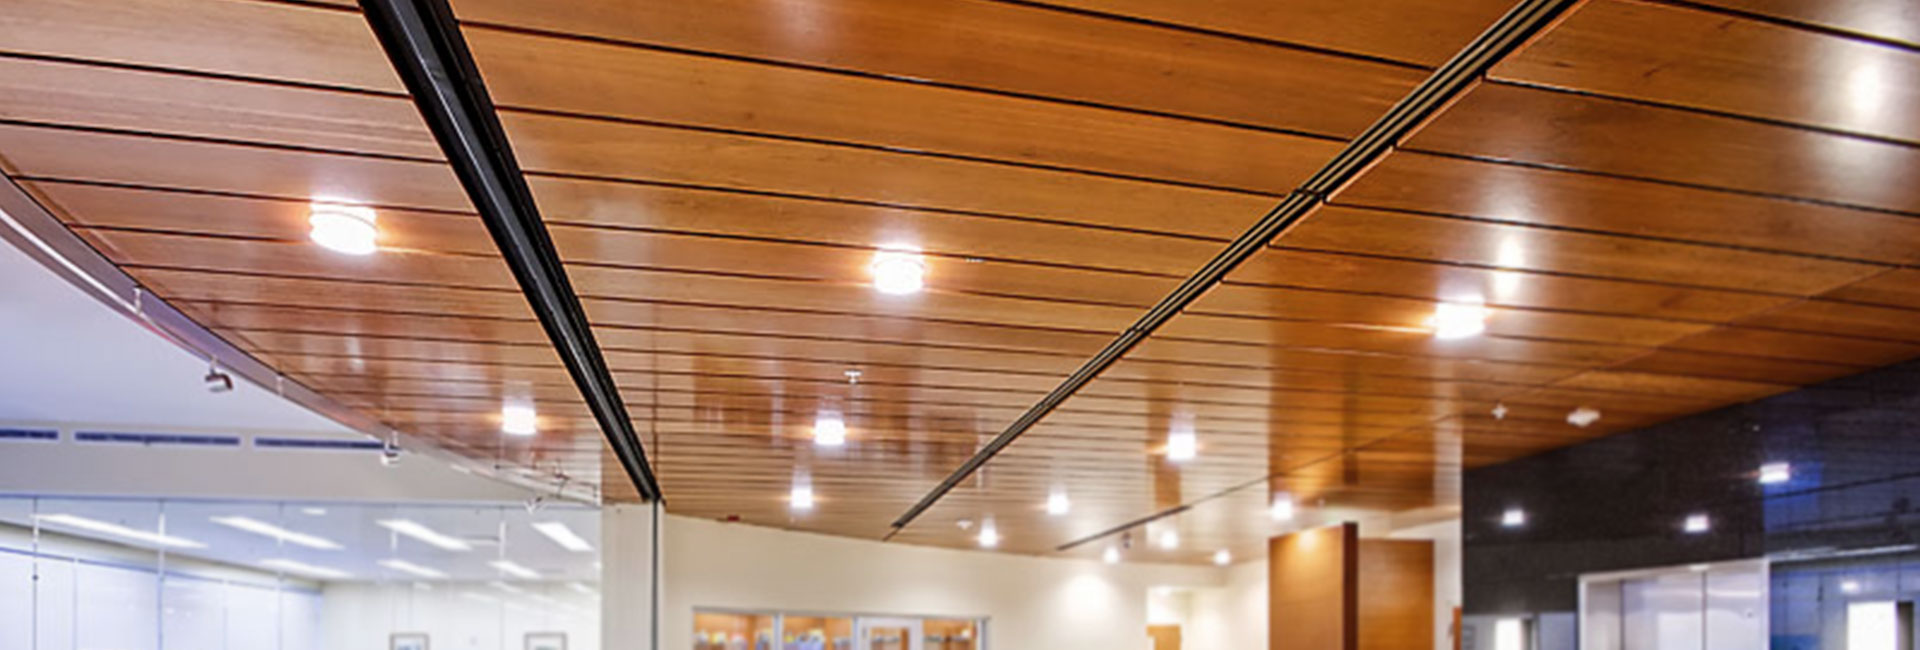 Linear Cherry Ceiling